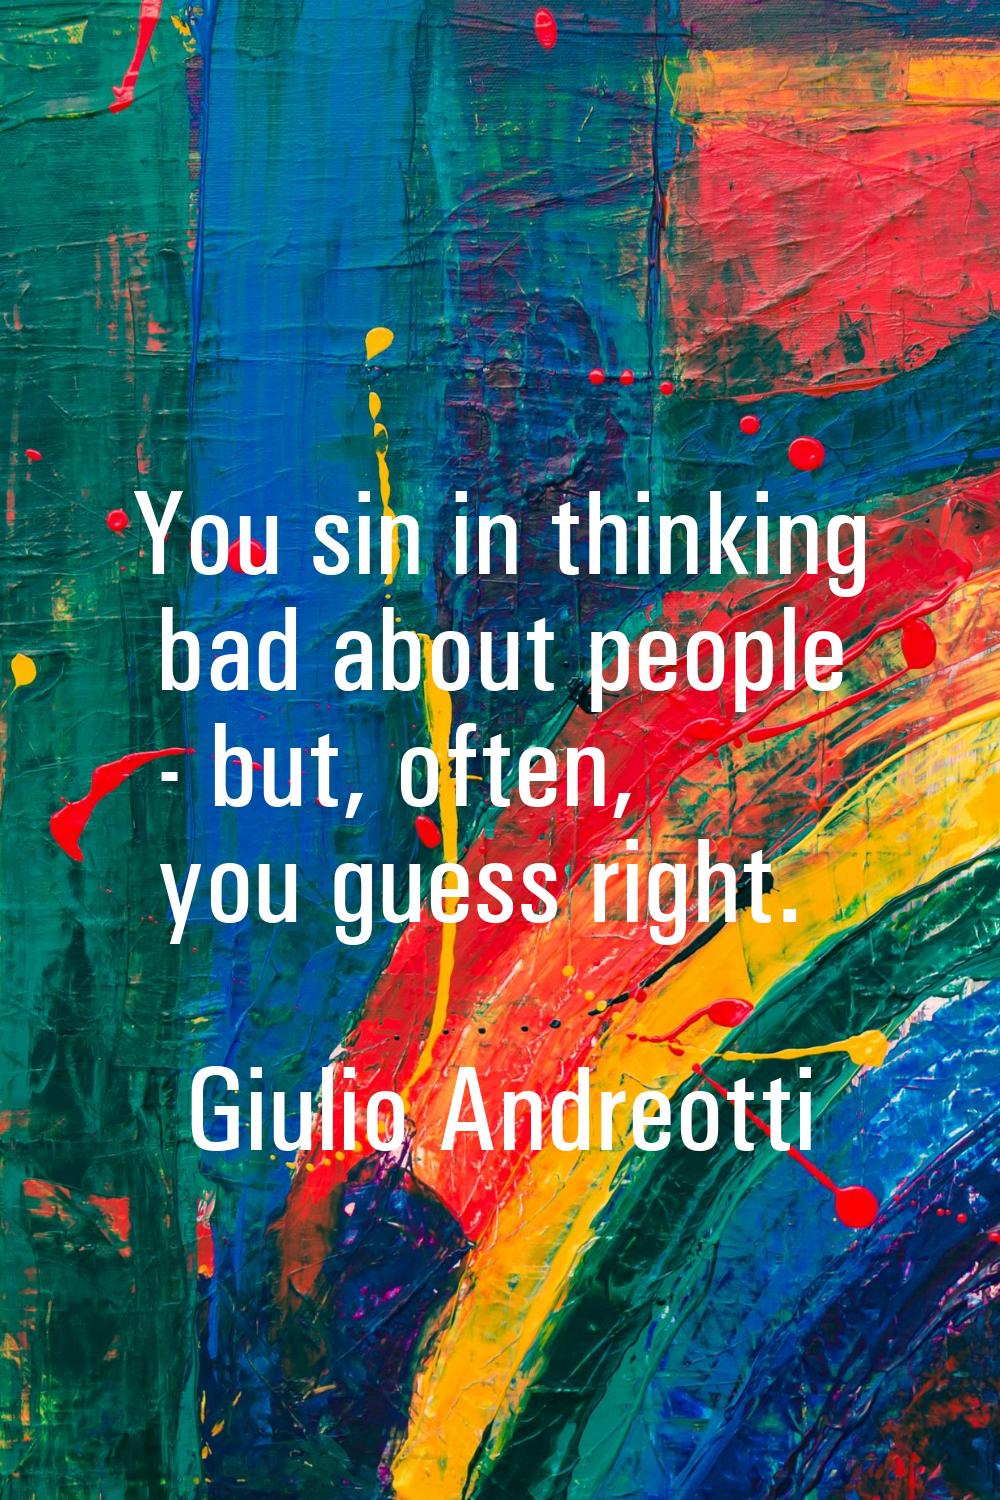 You sin in thinking bad about people - but, often, you guess right.